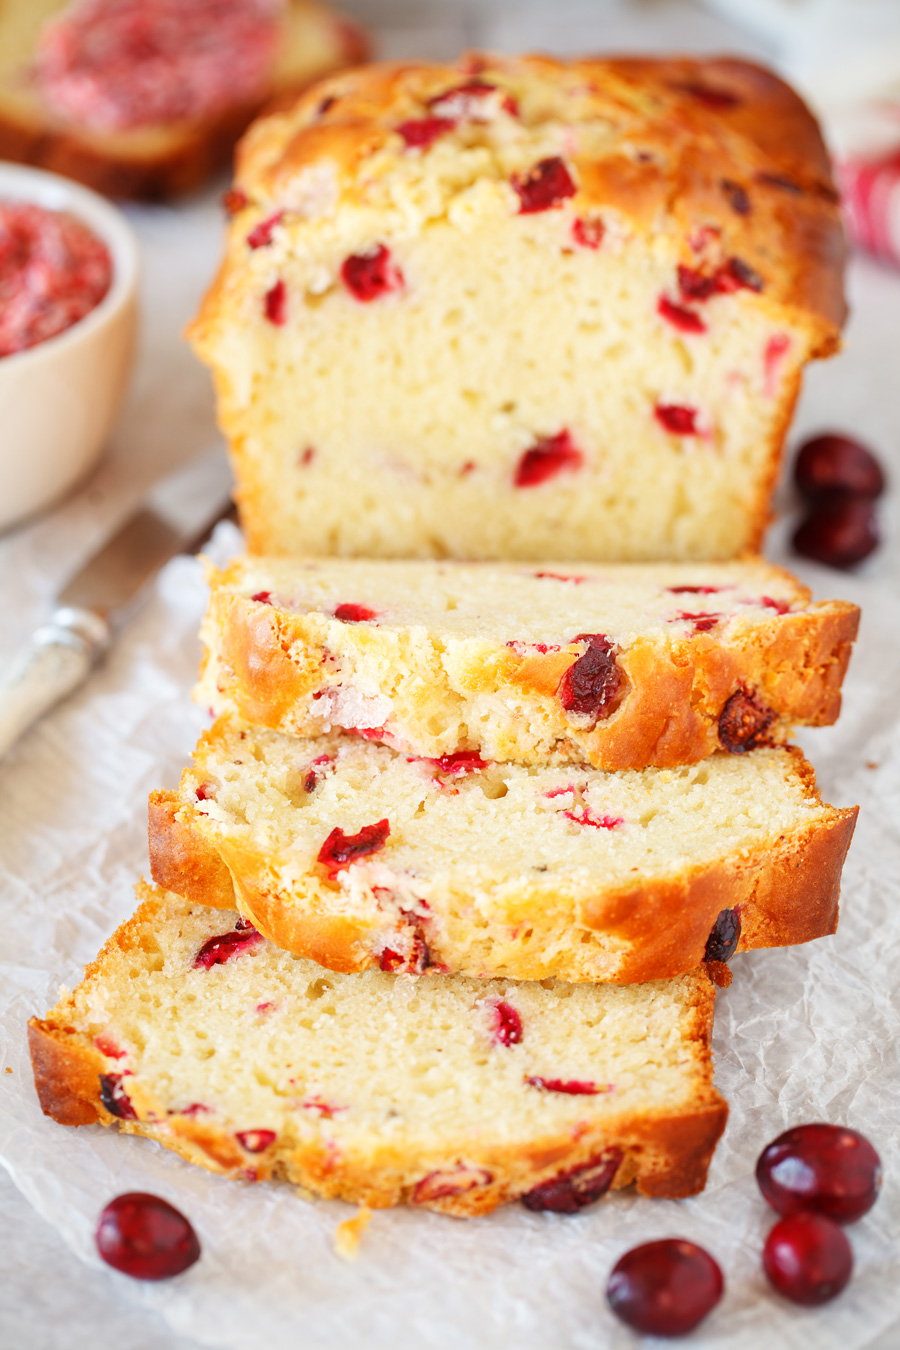 This Cranberry Bread is a delicious bread filled with fresh cranberries and topped with a delicious cranberry butter! Perfect for your Thanksgiving table!